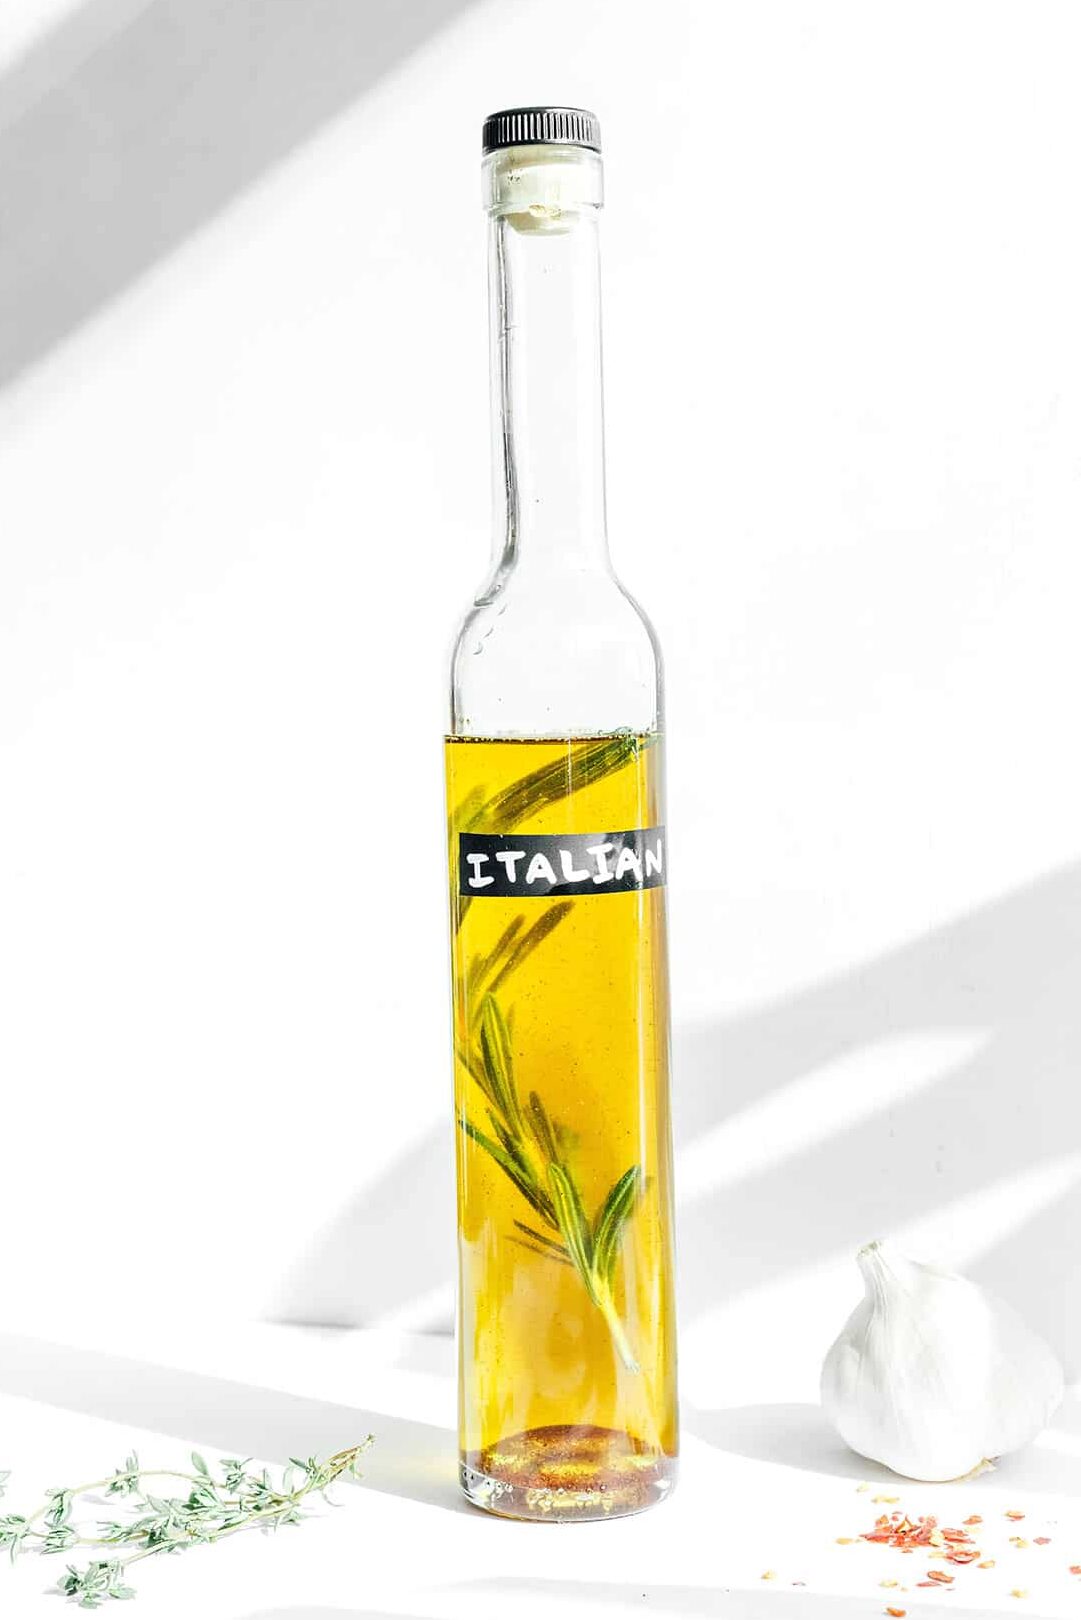 A bottle of Italian infused olive oil